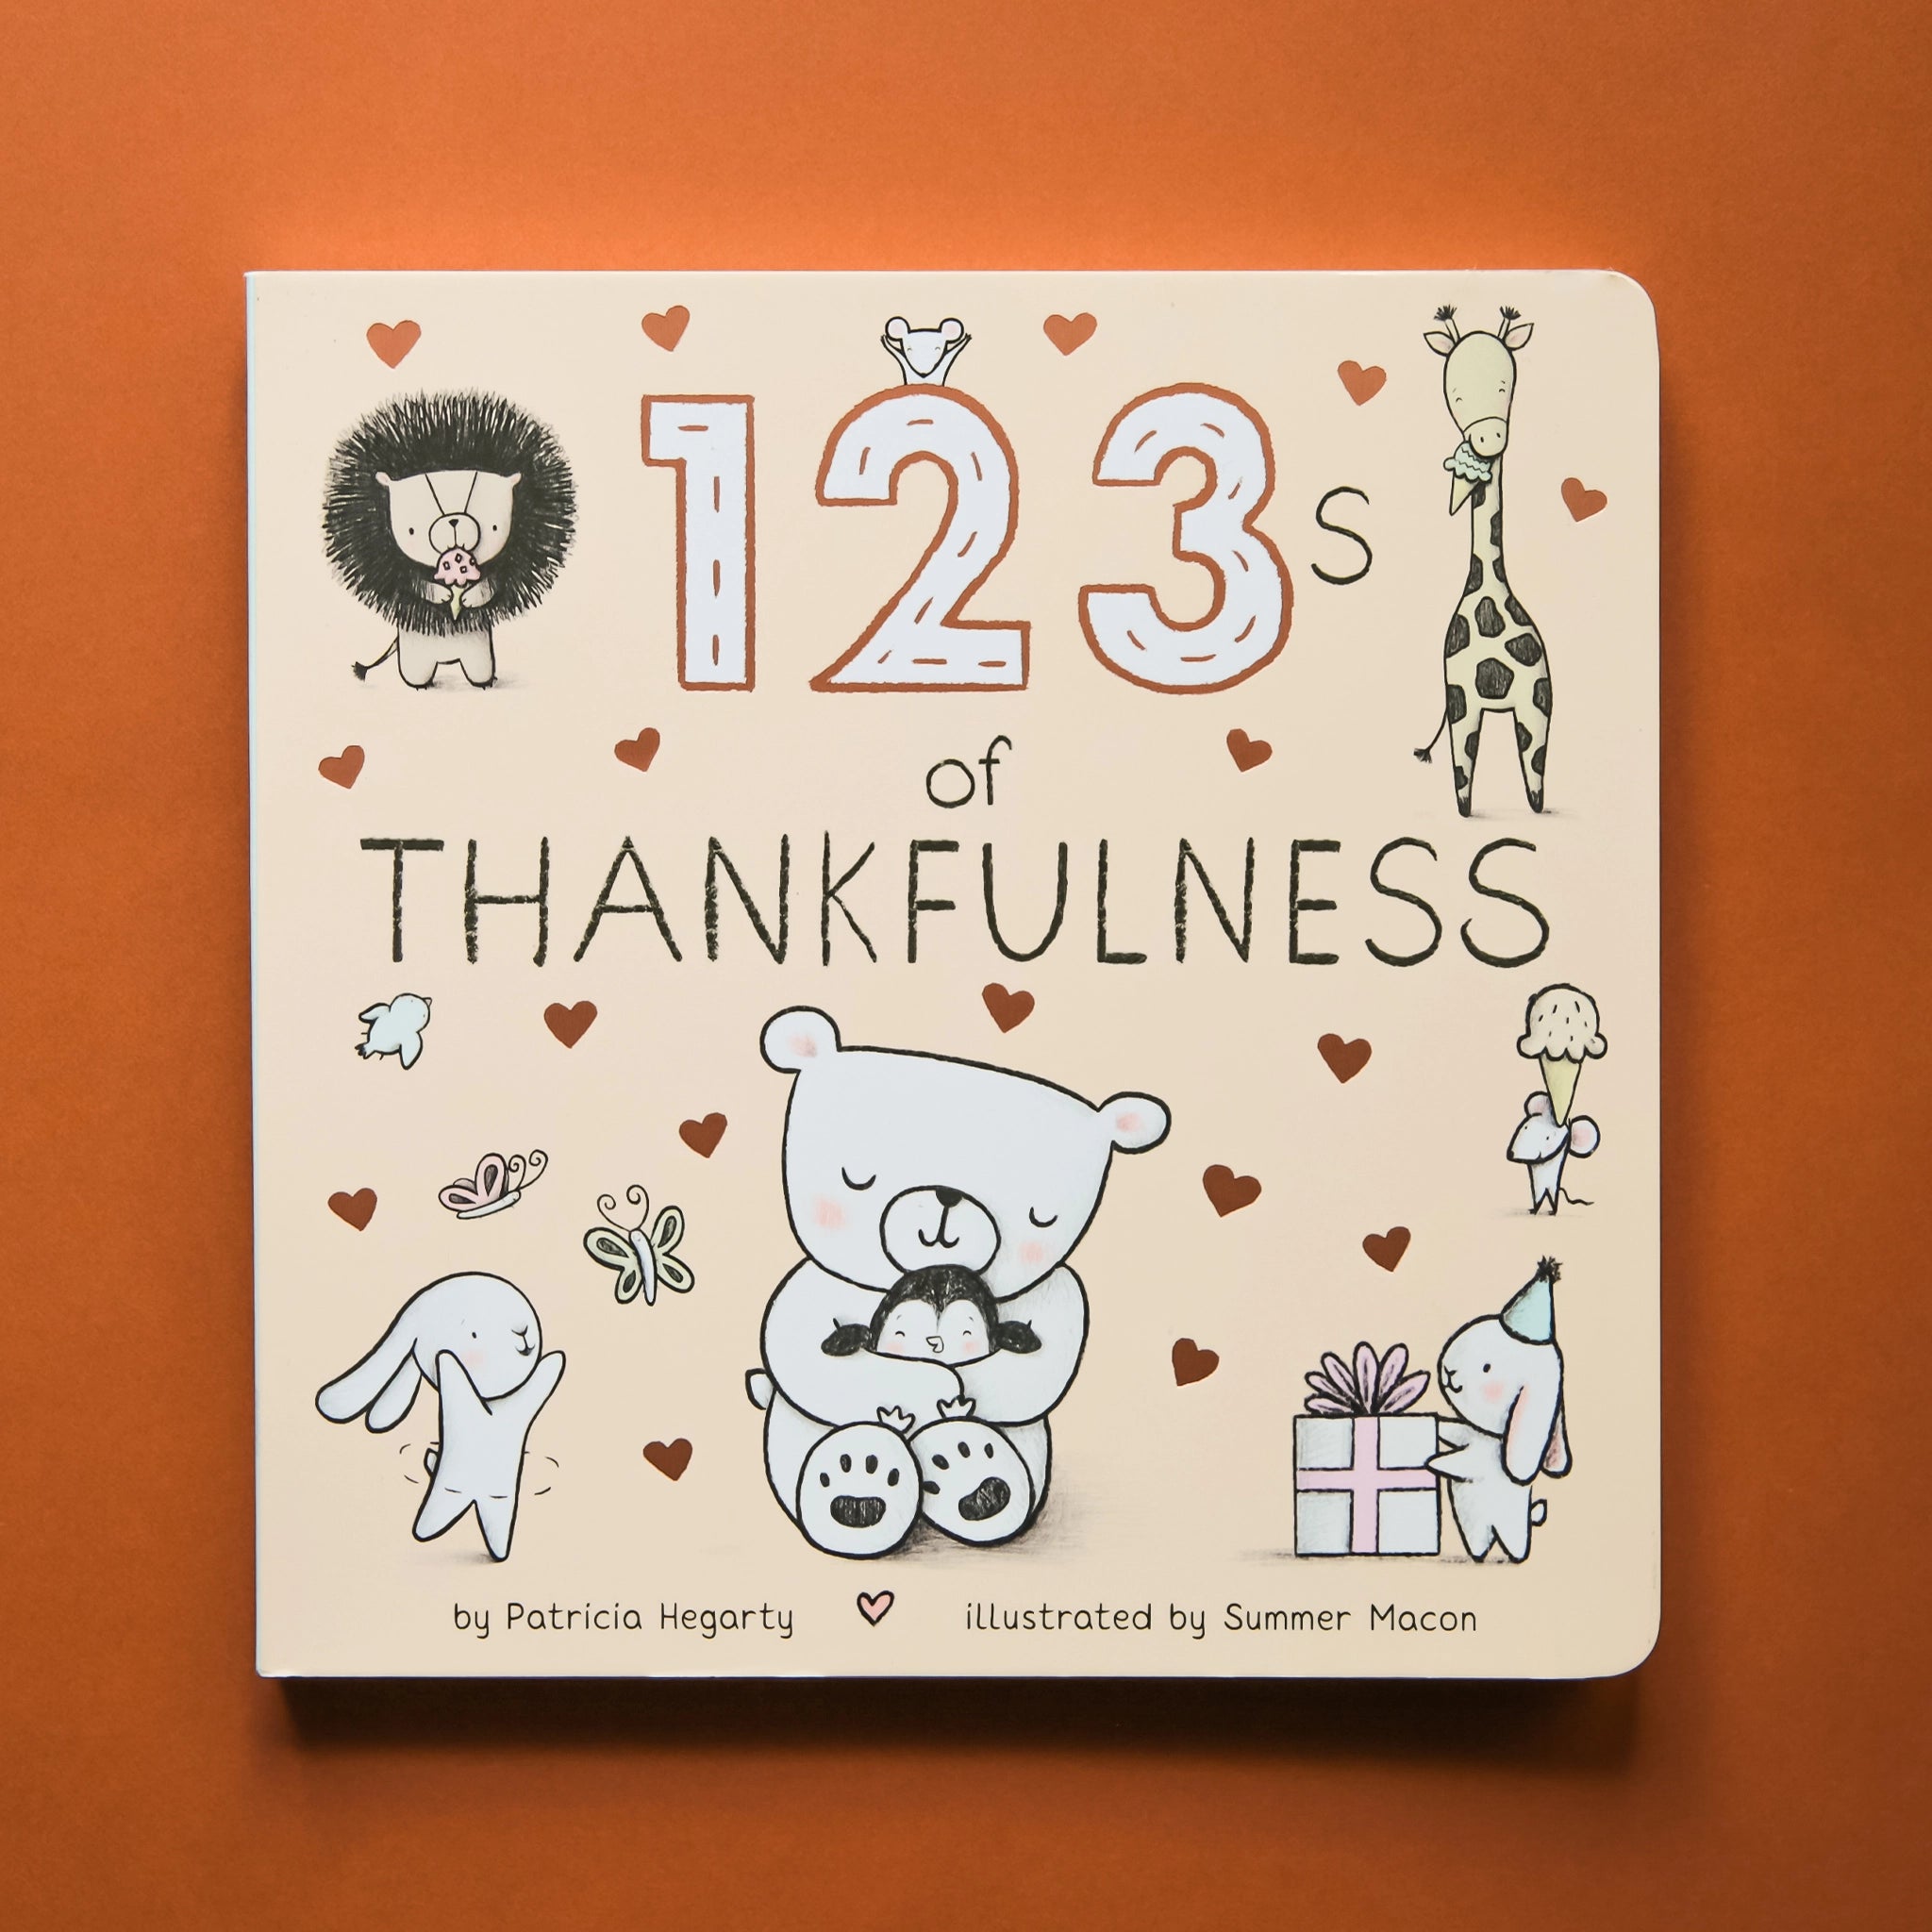 Small cream colored children's book titled "123's of Thankfulness" By Patricia Hegarty, Illustrated by Summer Macon. On the cover are illustrated gold hearts and black and white animals, including a lion, giraffe eating ice cream, mice, rabbits, and a bear hugging a baby penguin.